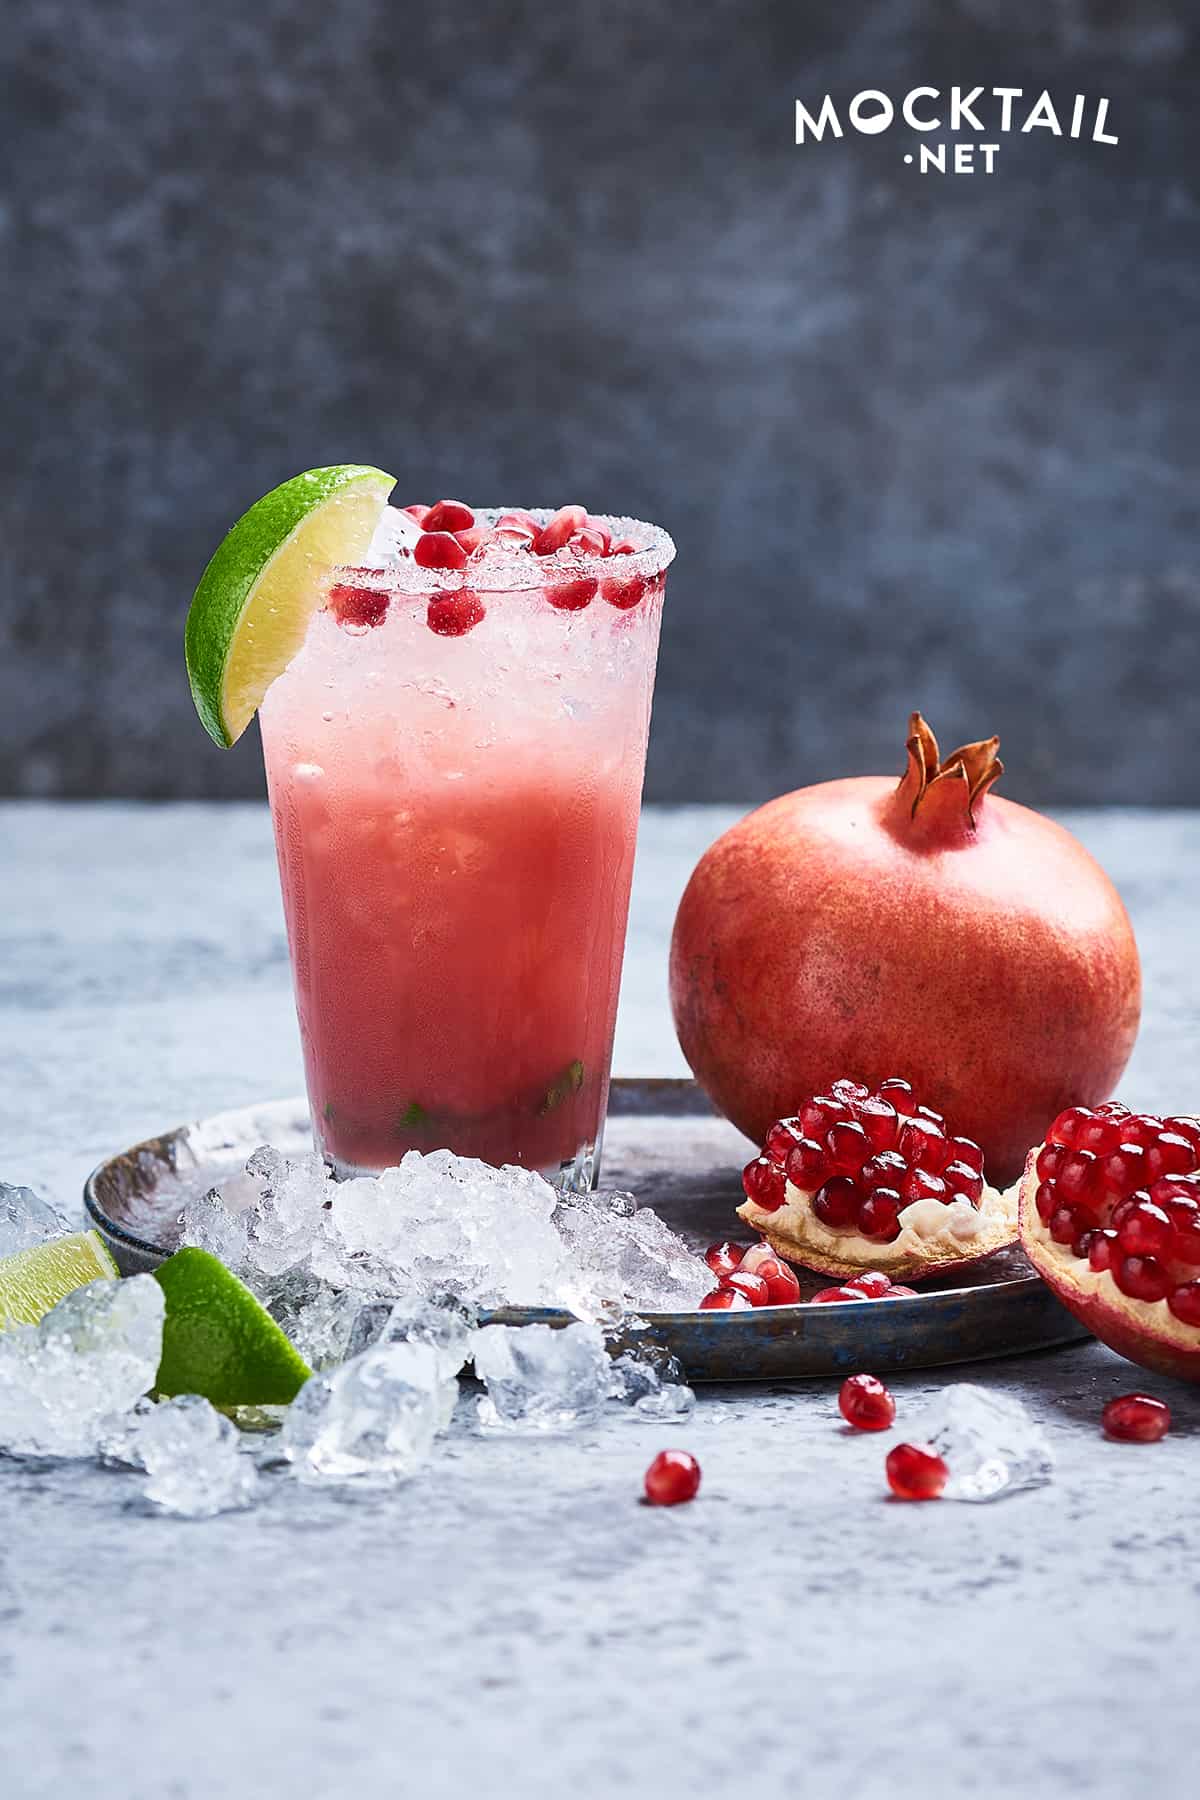 Ingredients in a Pomegranate Mocktail